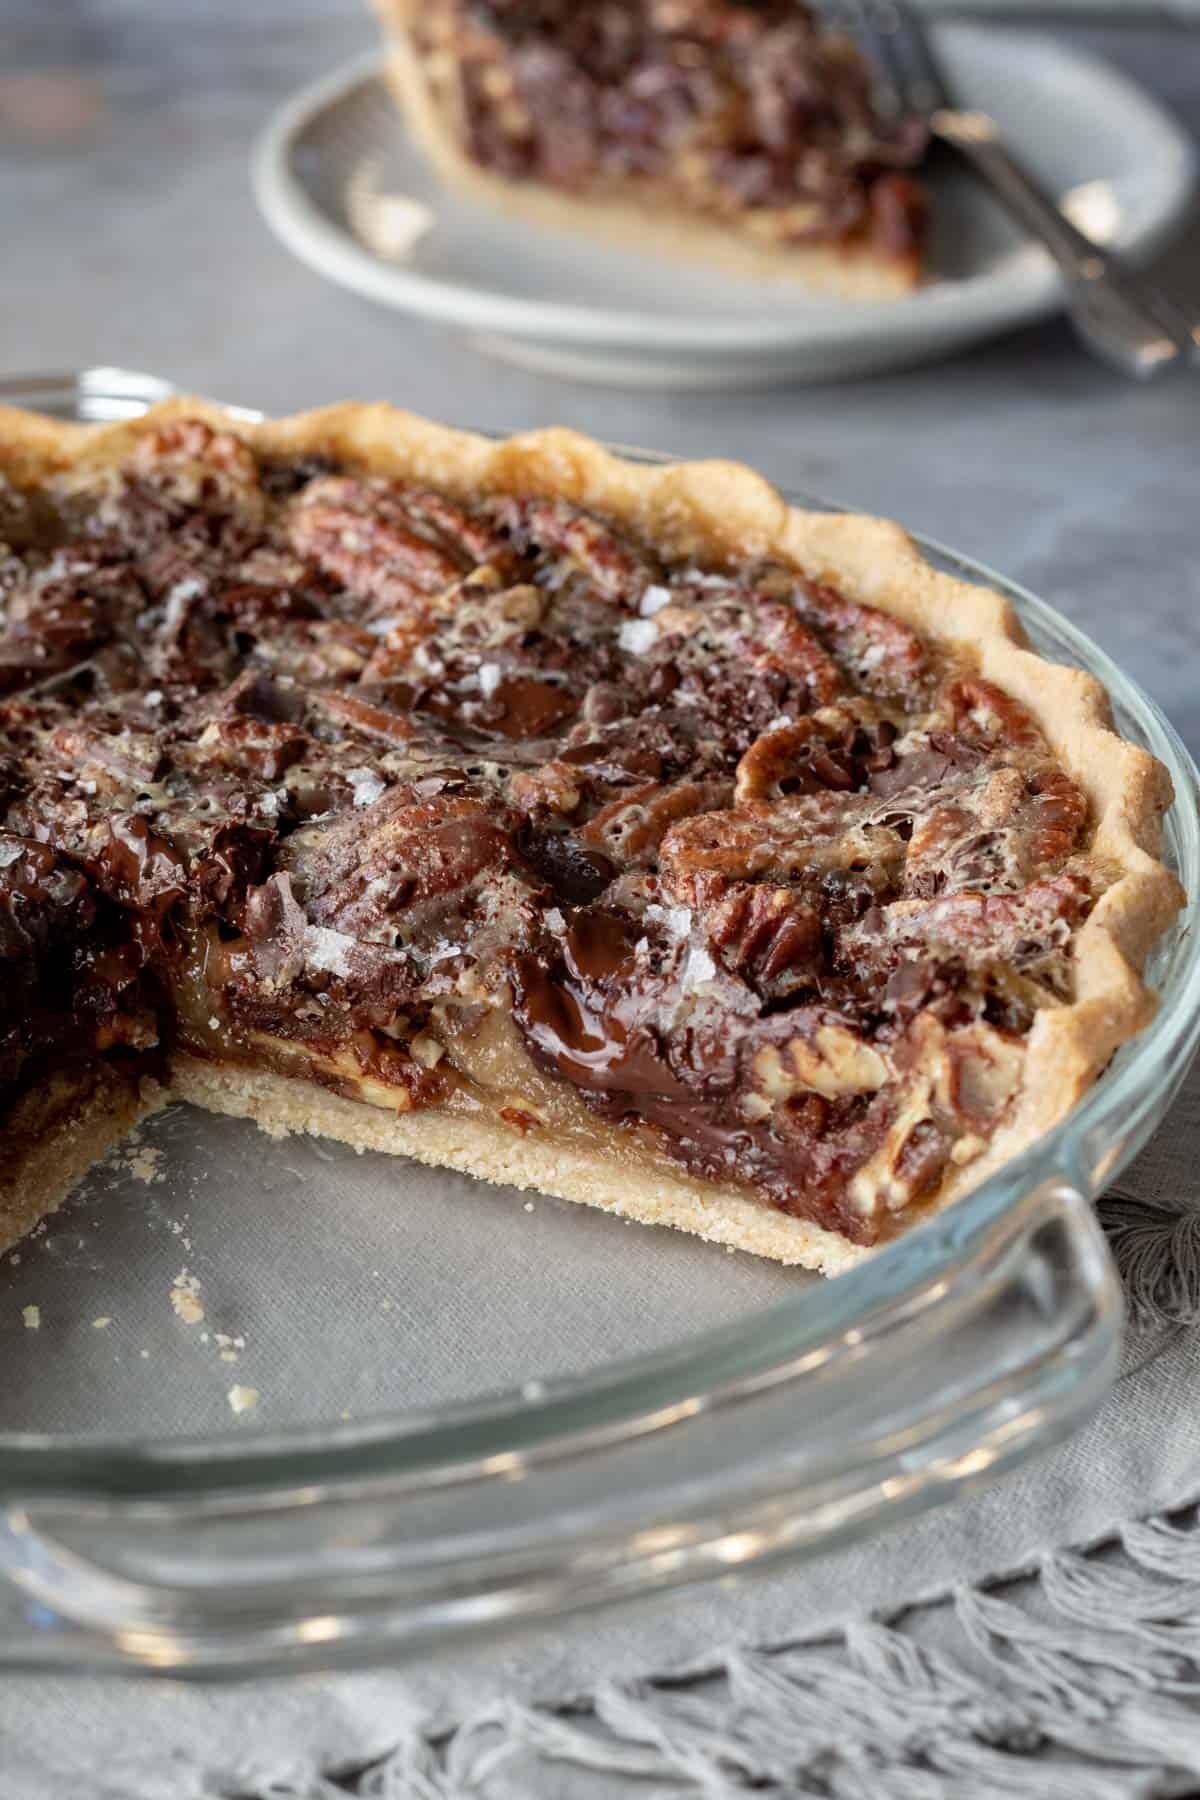 slices have been removed from the pie in the dish showing the interior texture with pecans and melted chocolate.